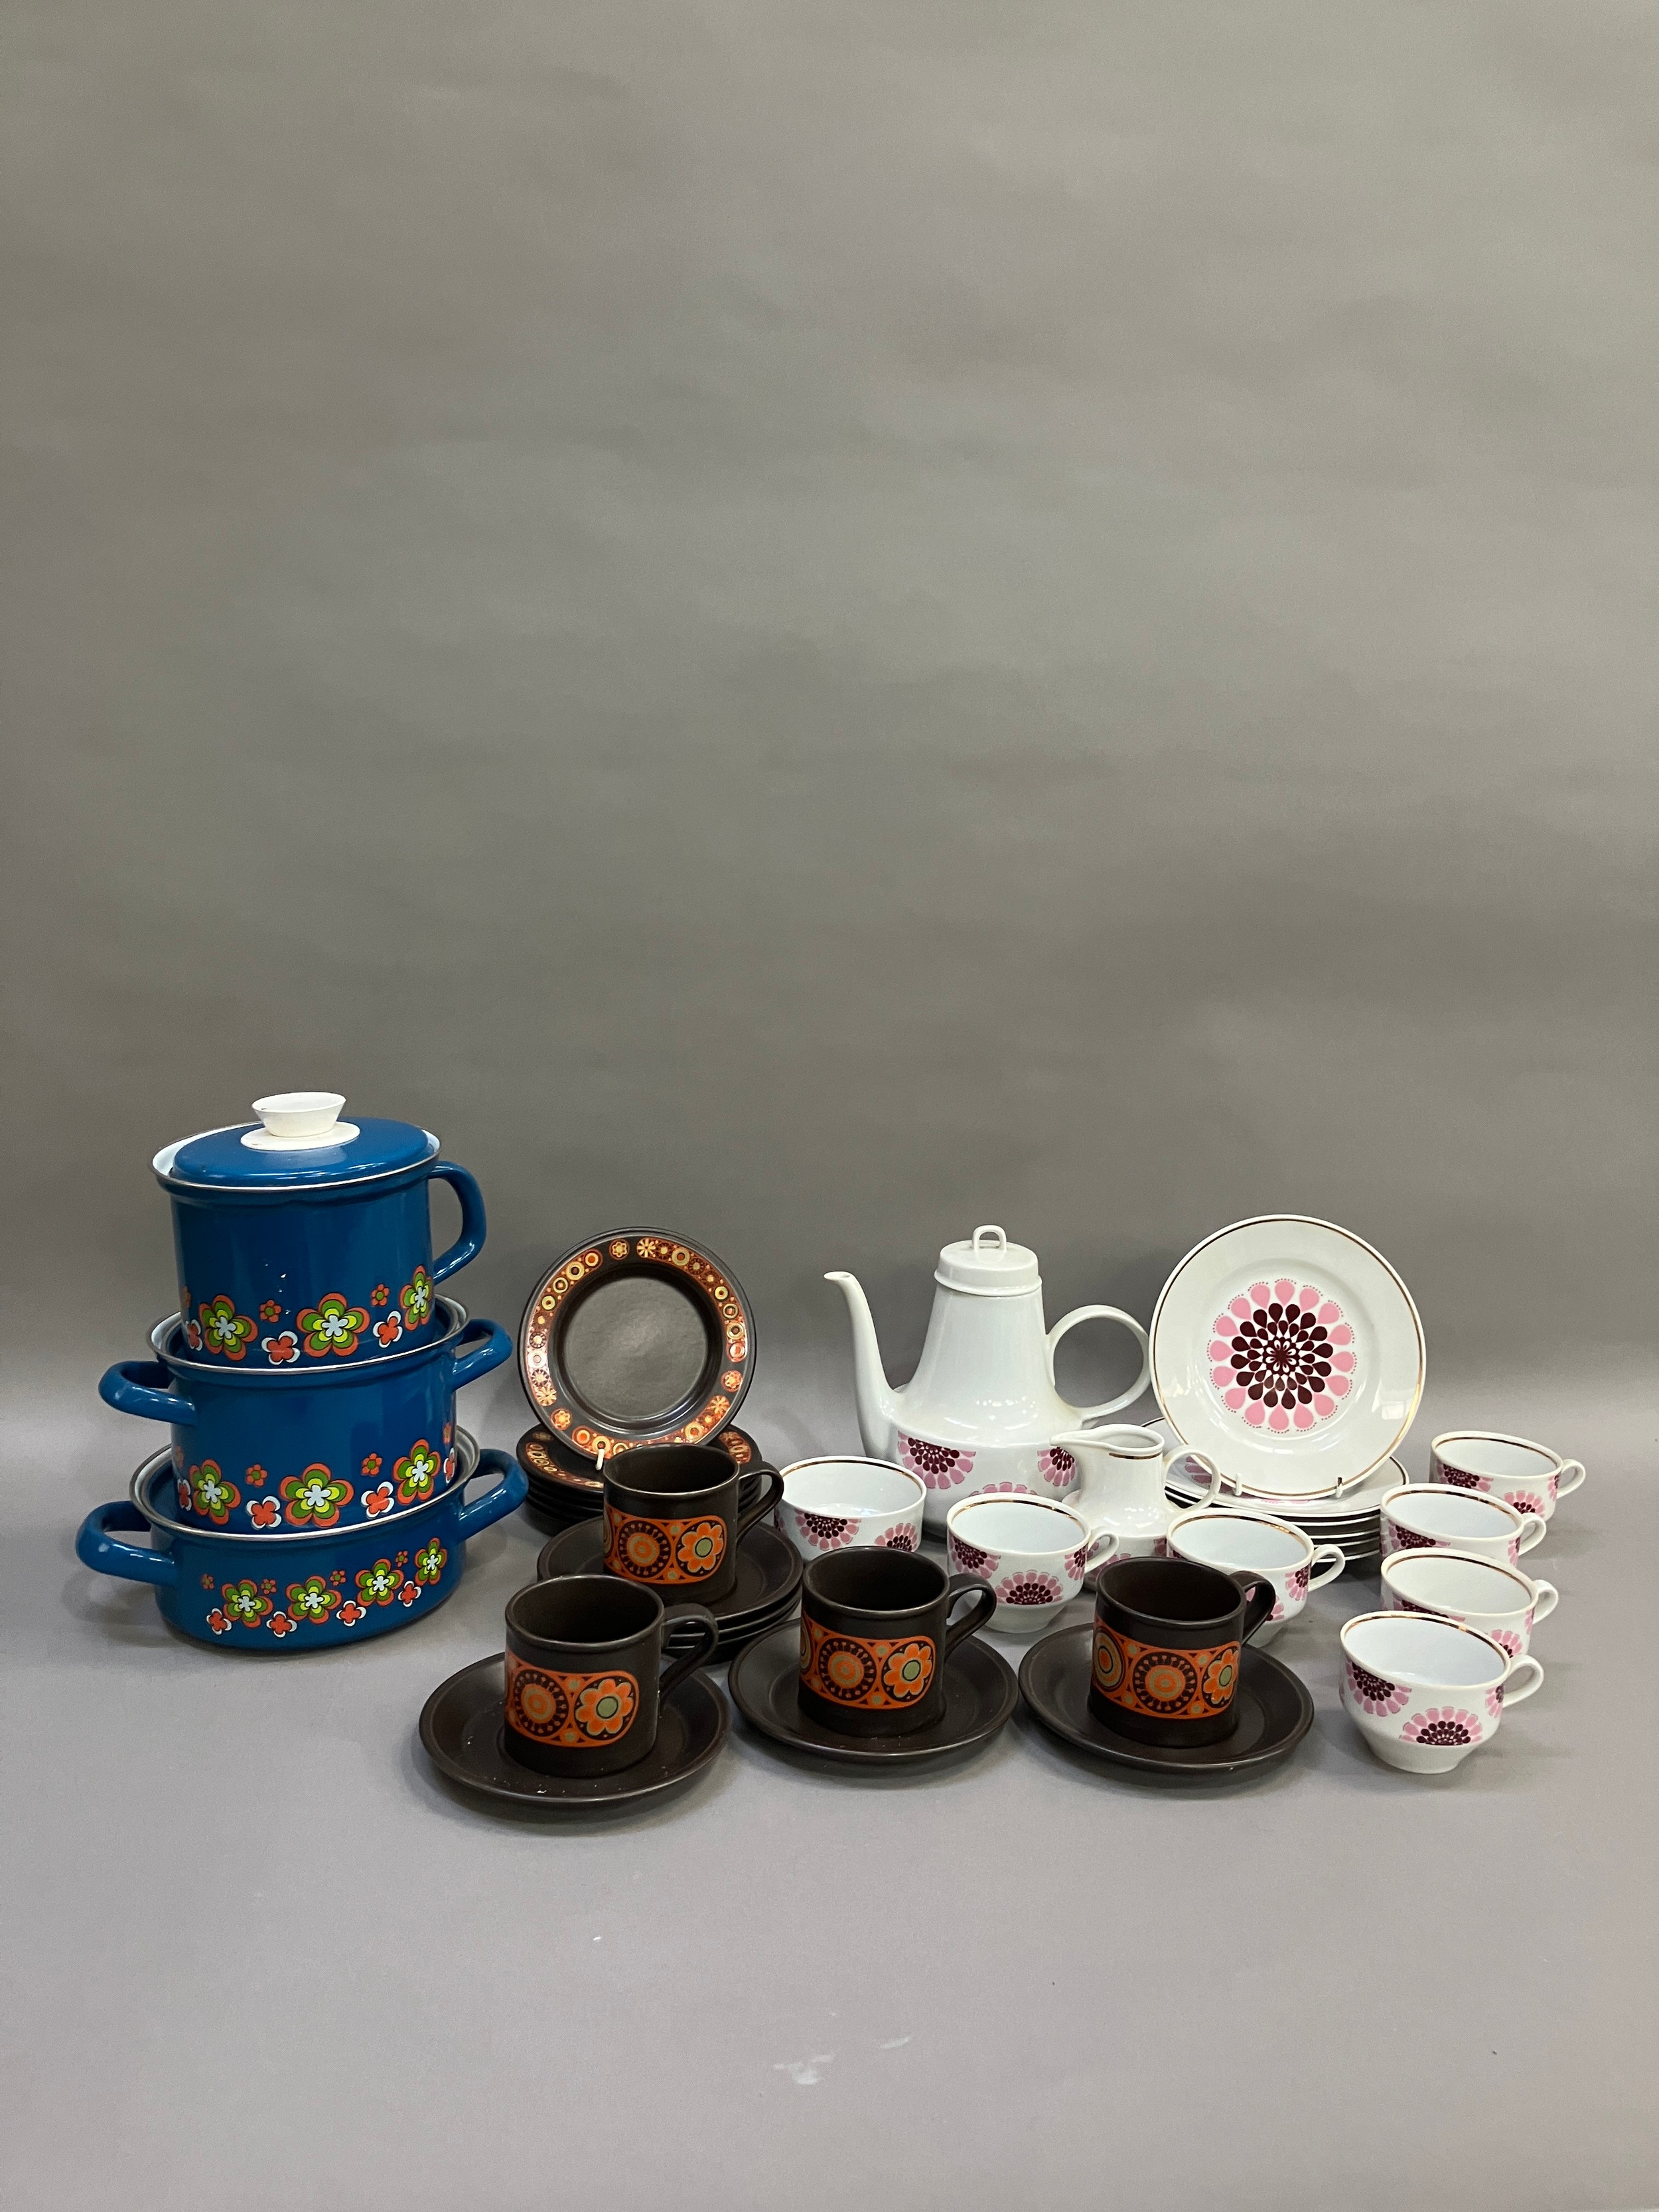 A collection of 1970s items including a pink and white coffee pot cups and tea plate, a brown